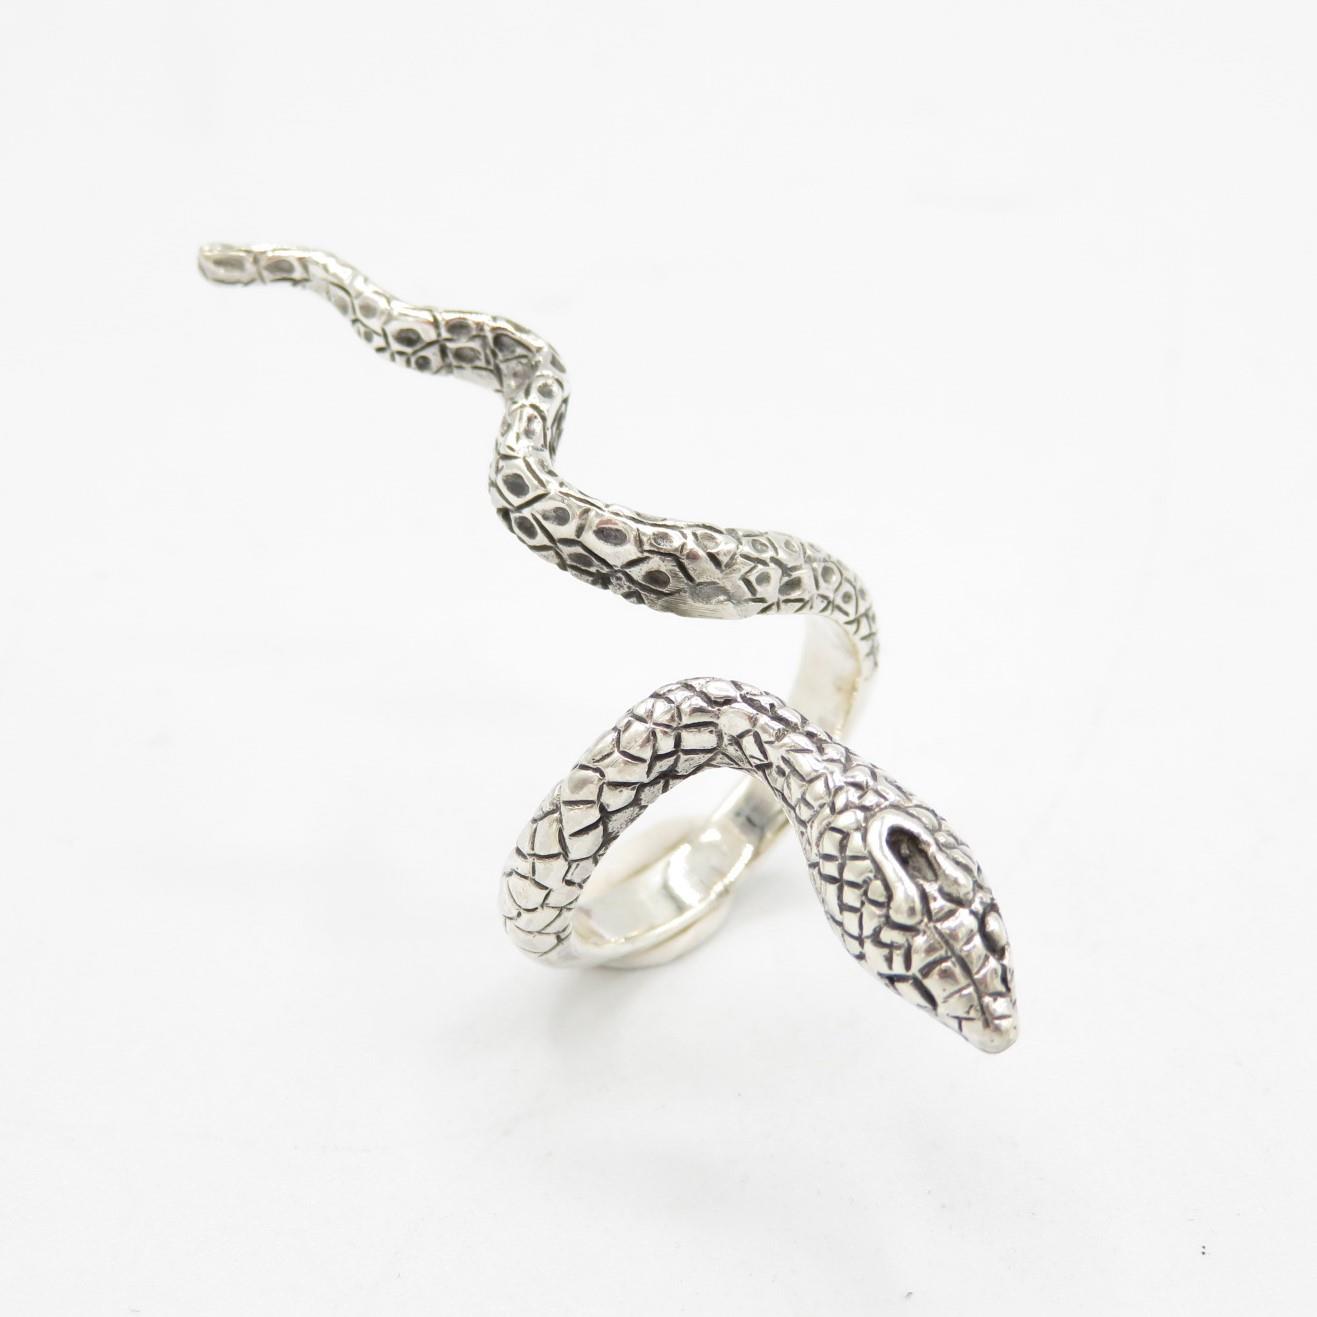 HM Sterling Silver 925 snake ring (7.6g) In excellent condition